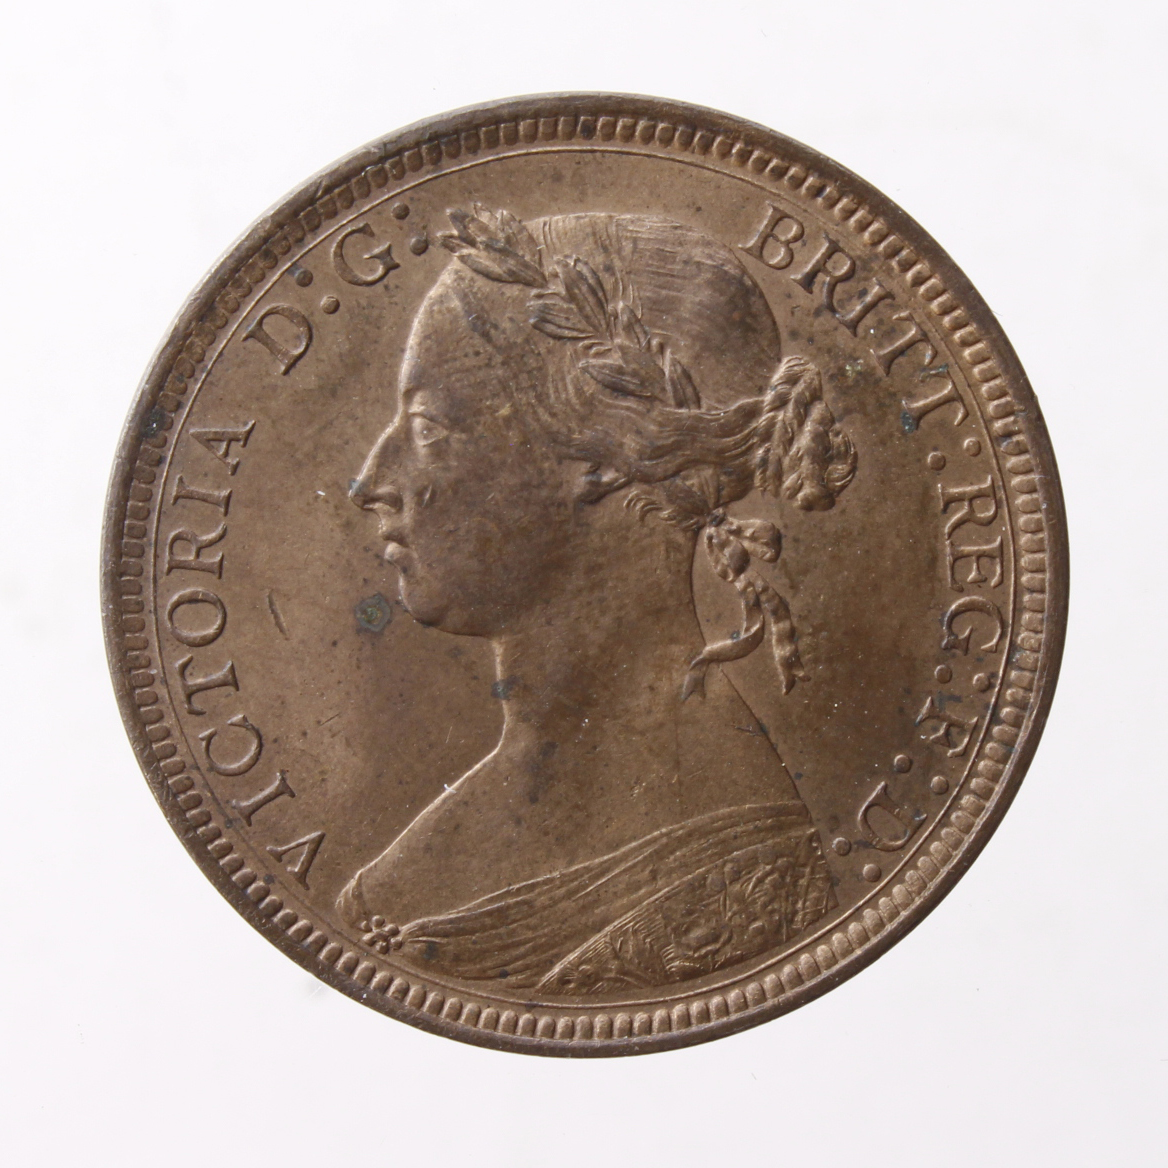 Halfpenny 1894, UNC, some tone spots and small marks.